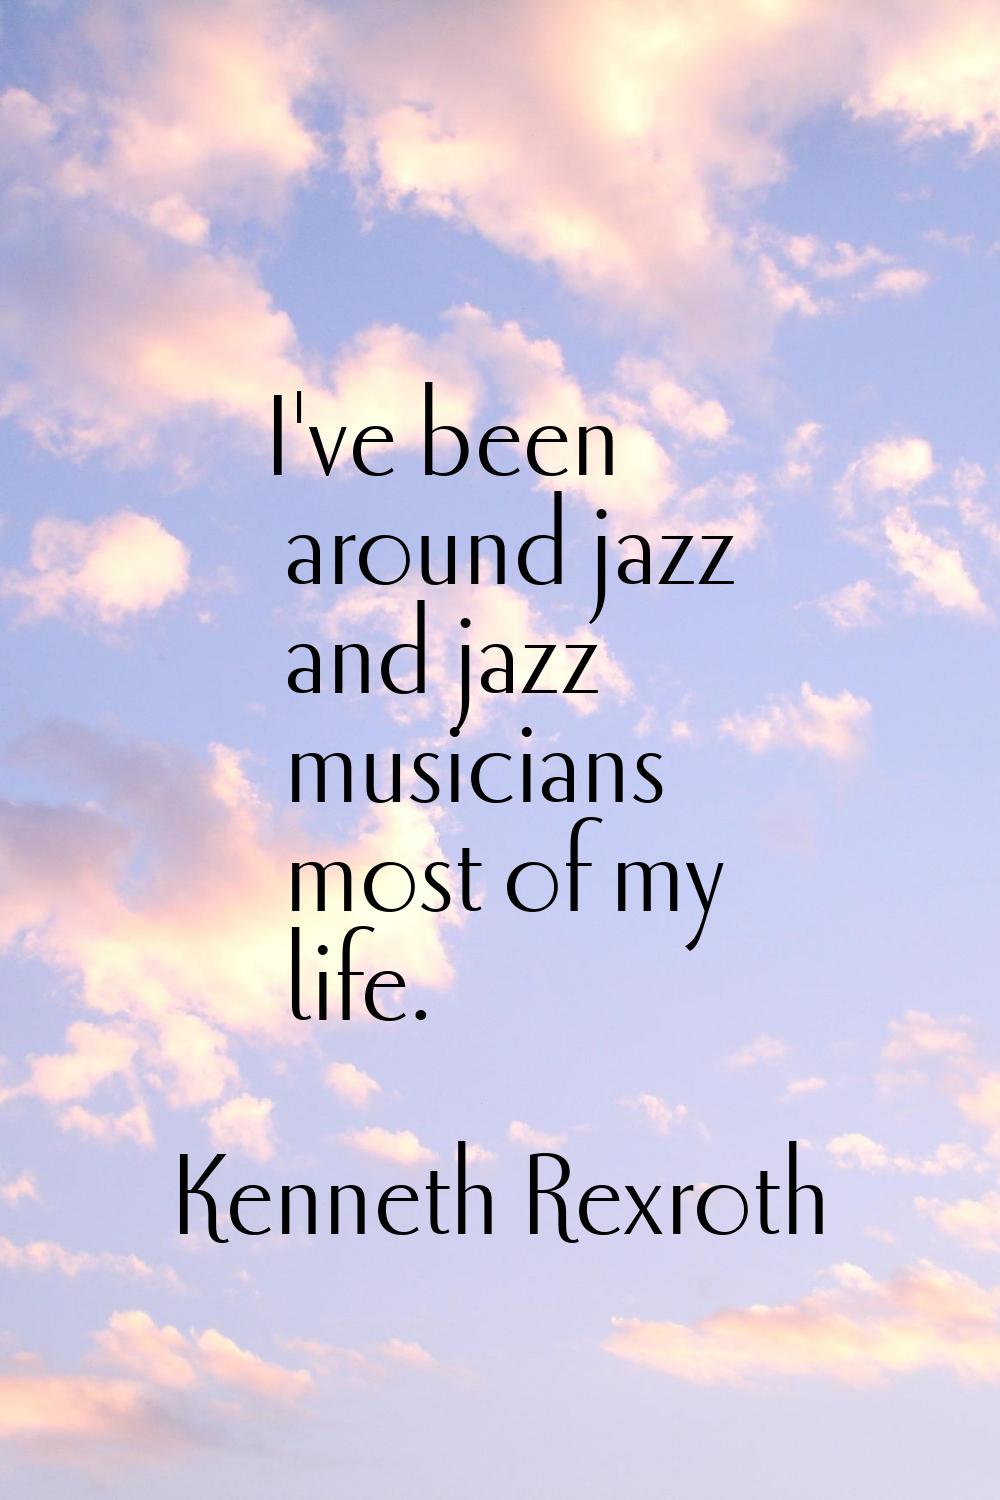 I've been around jazz and jazz musicians most of my life.